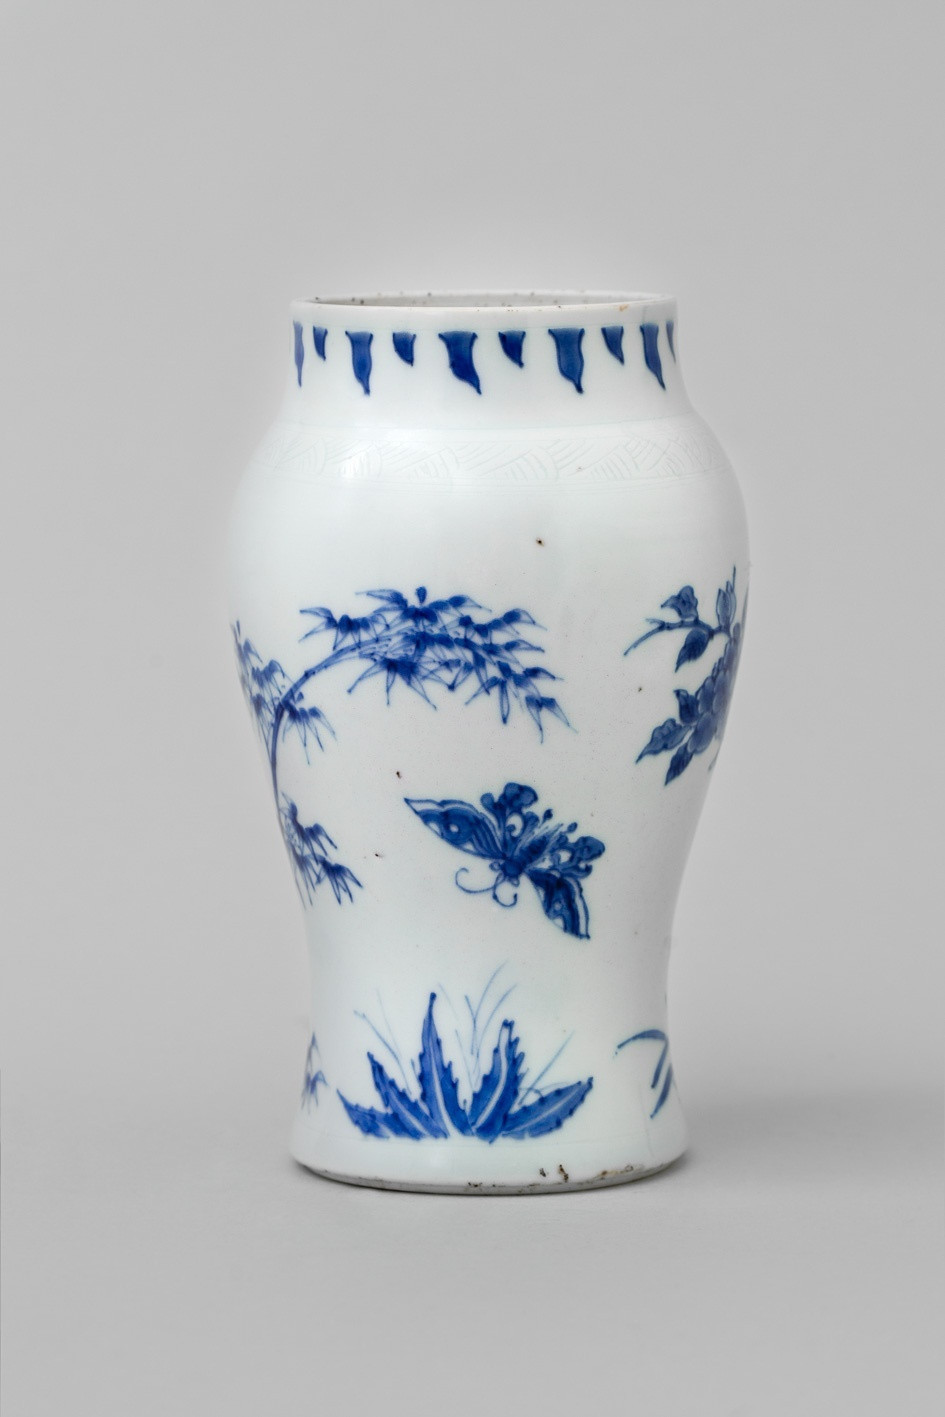 23 Elegant White Ceramic Urn Vase 2024 free download white ceramic urn vase of 10 best of bamboo vase bogekompresorturkiye com with a chinese transitional blue and white vase